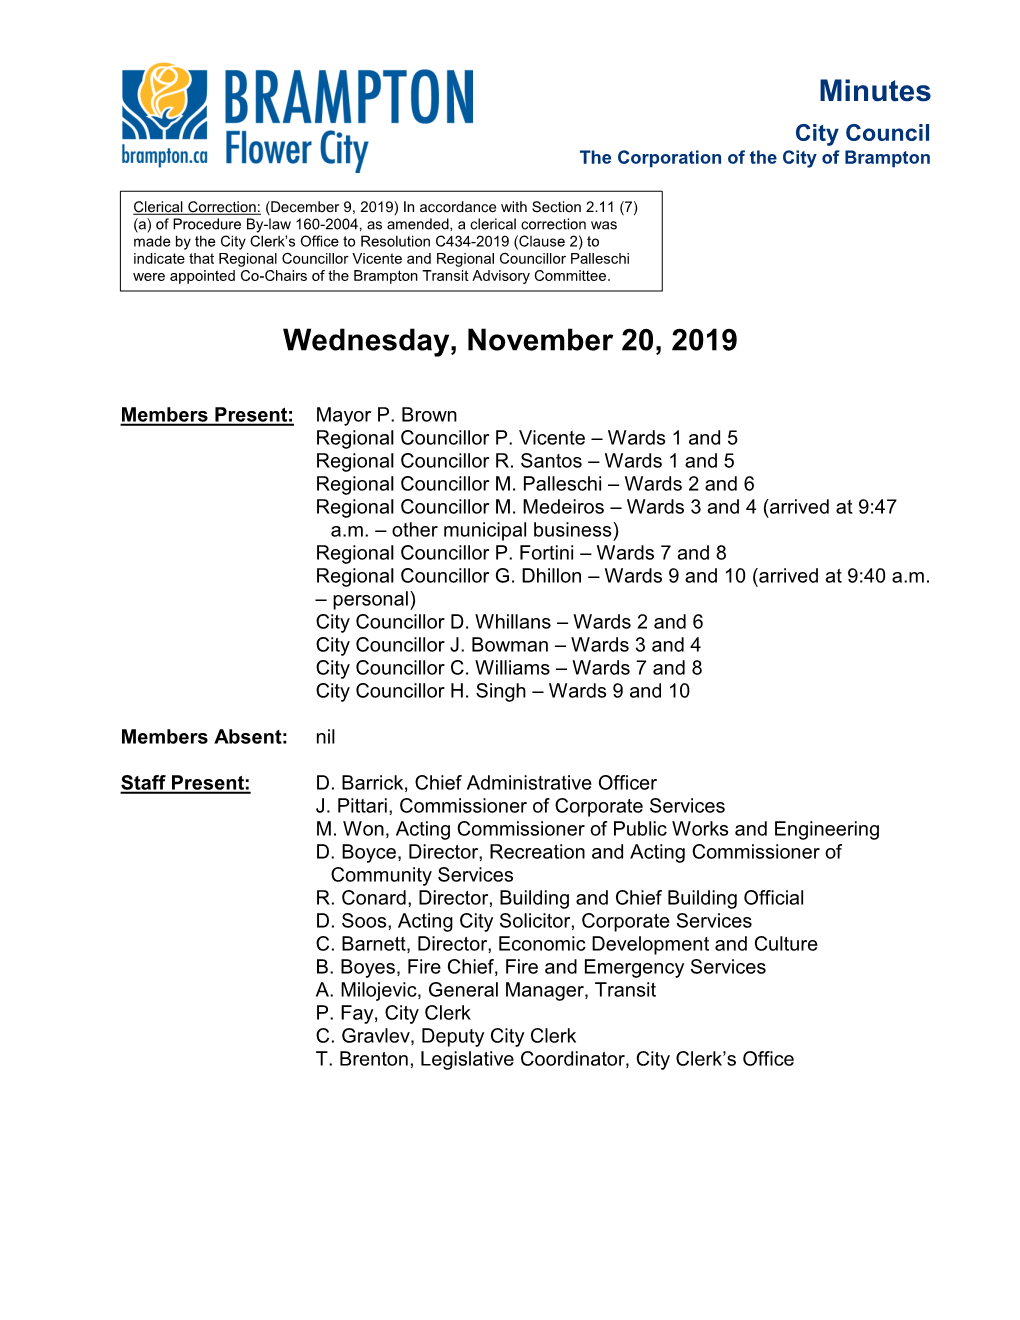 City Council Minutes for November 20, 2019